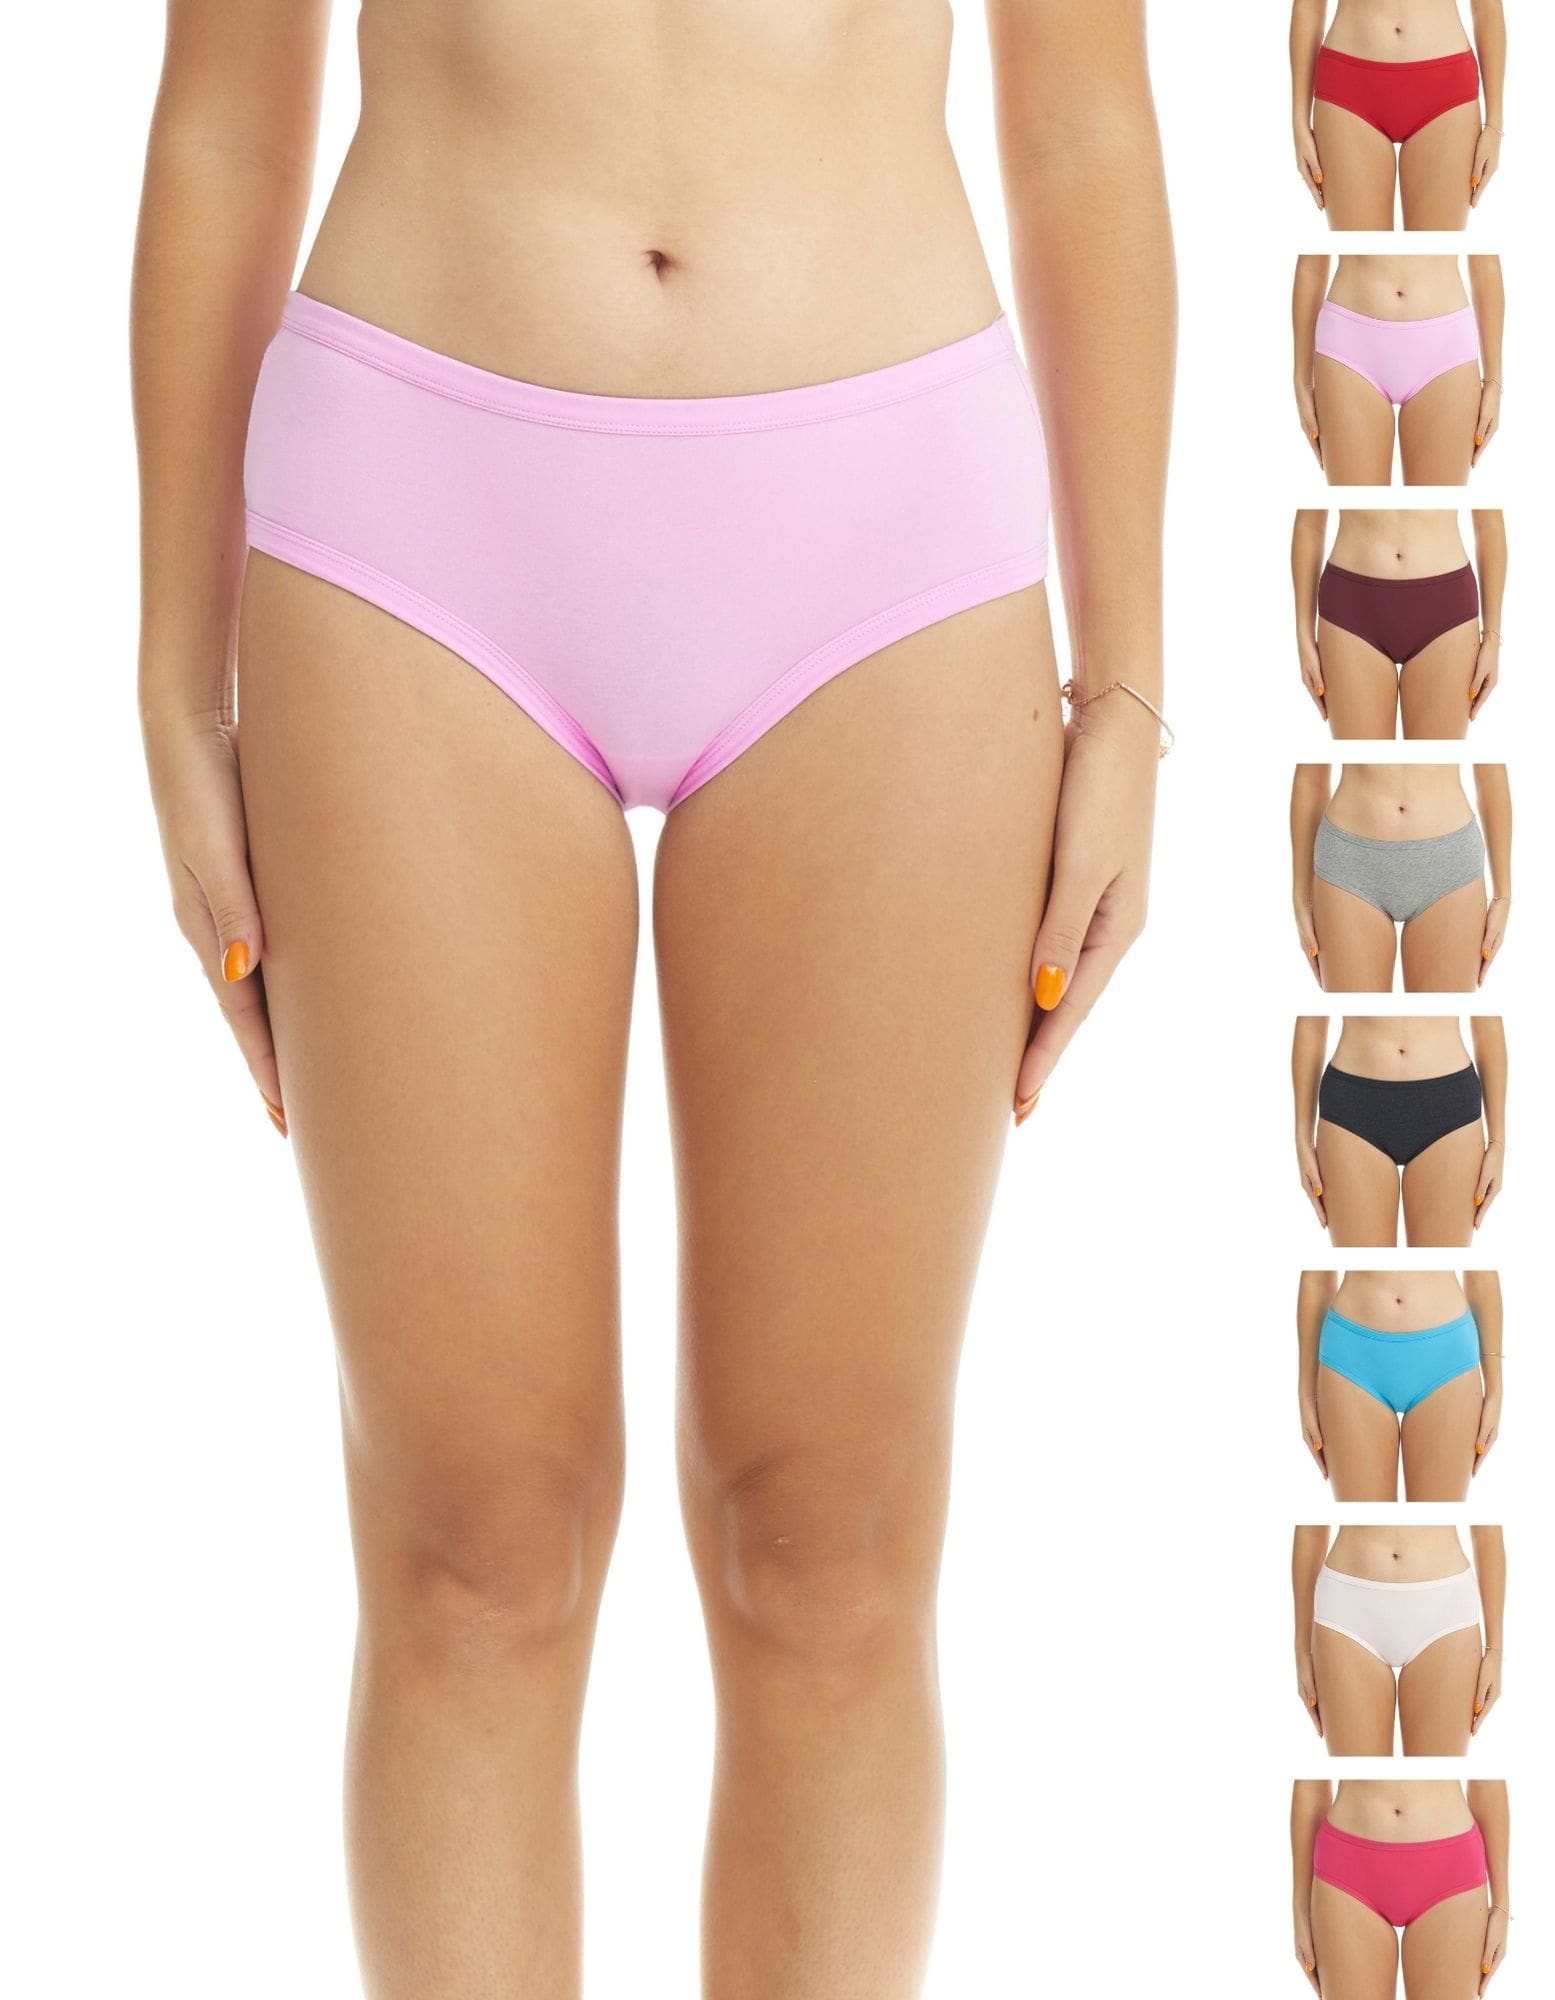 soft cotton mid-rise brief underwear panties for women in assorted colors